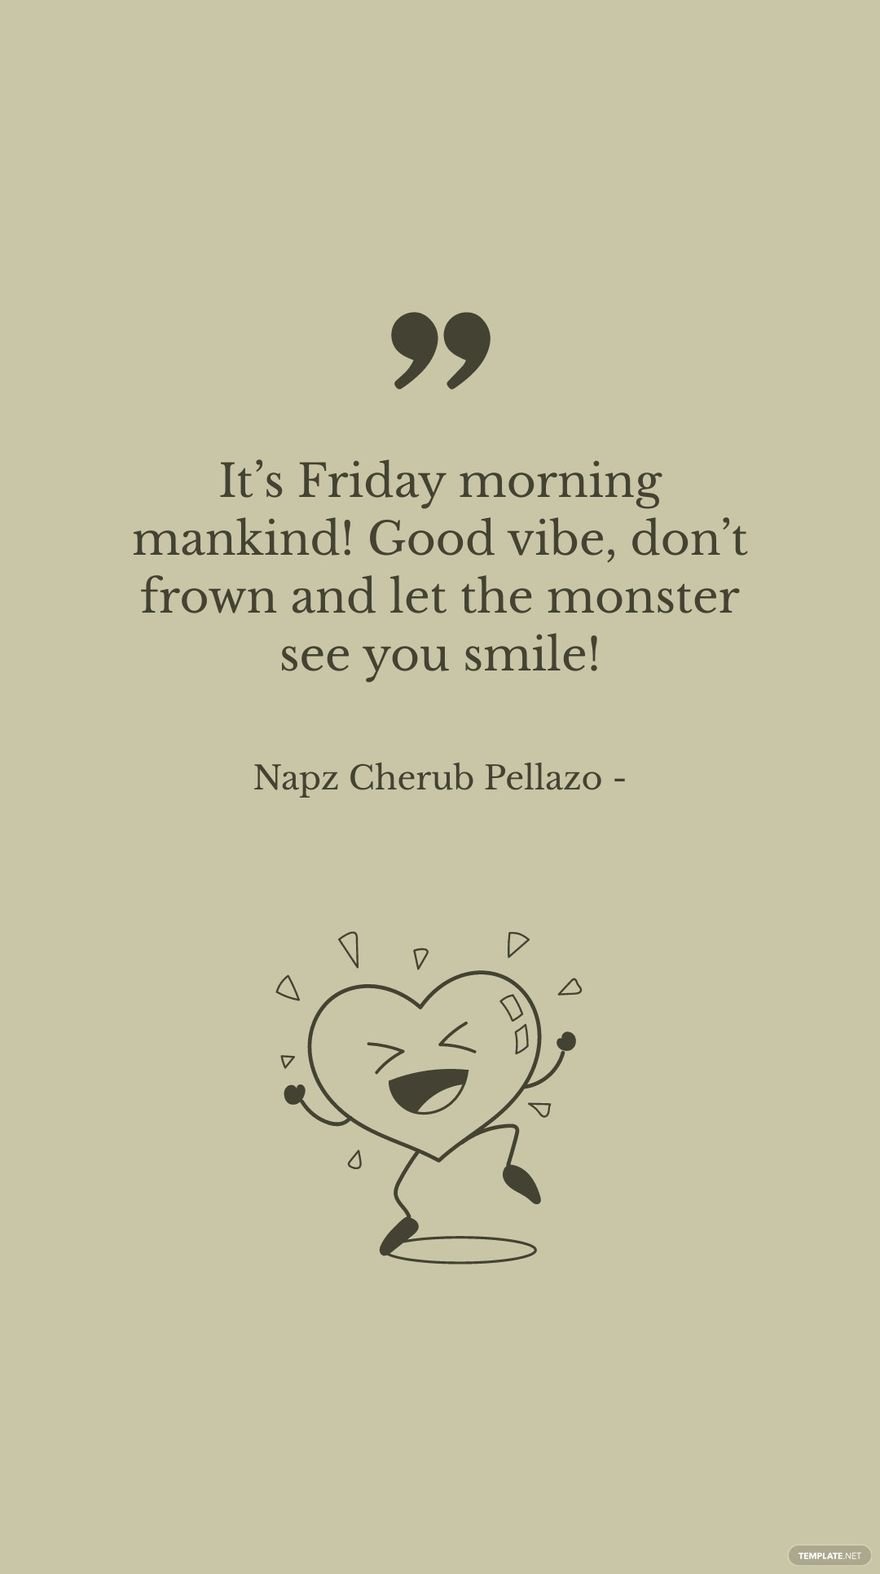 Napz Cherub Pellazo - It’s Friday morning mankind! Good vibe, don’t frown and let the monster see you smile! in JPG